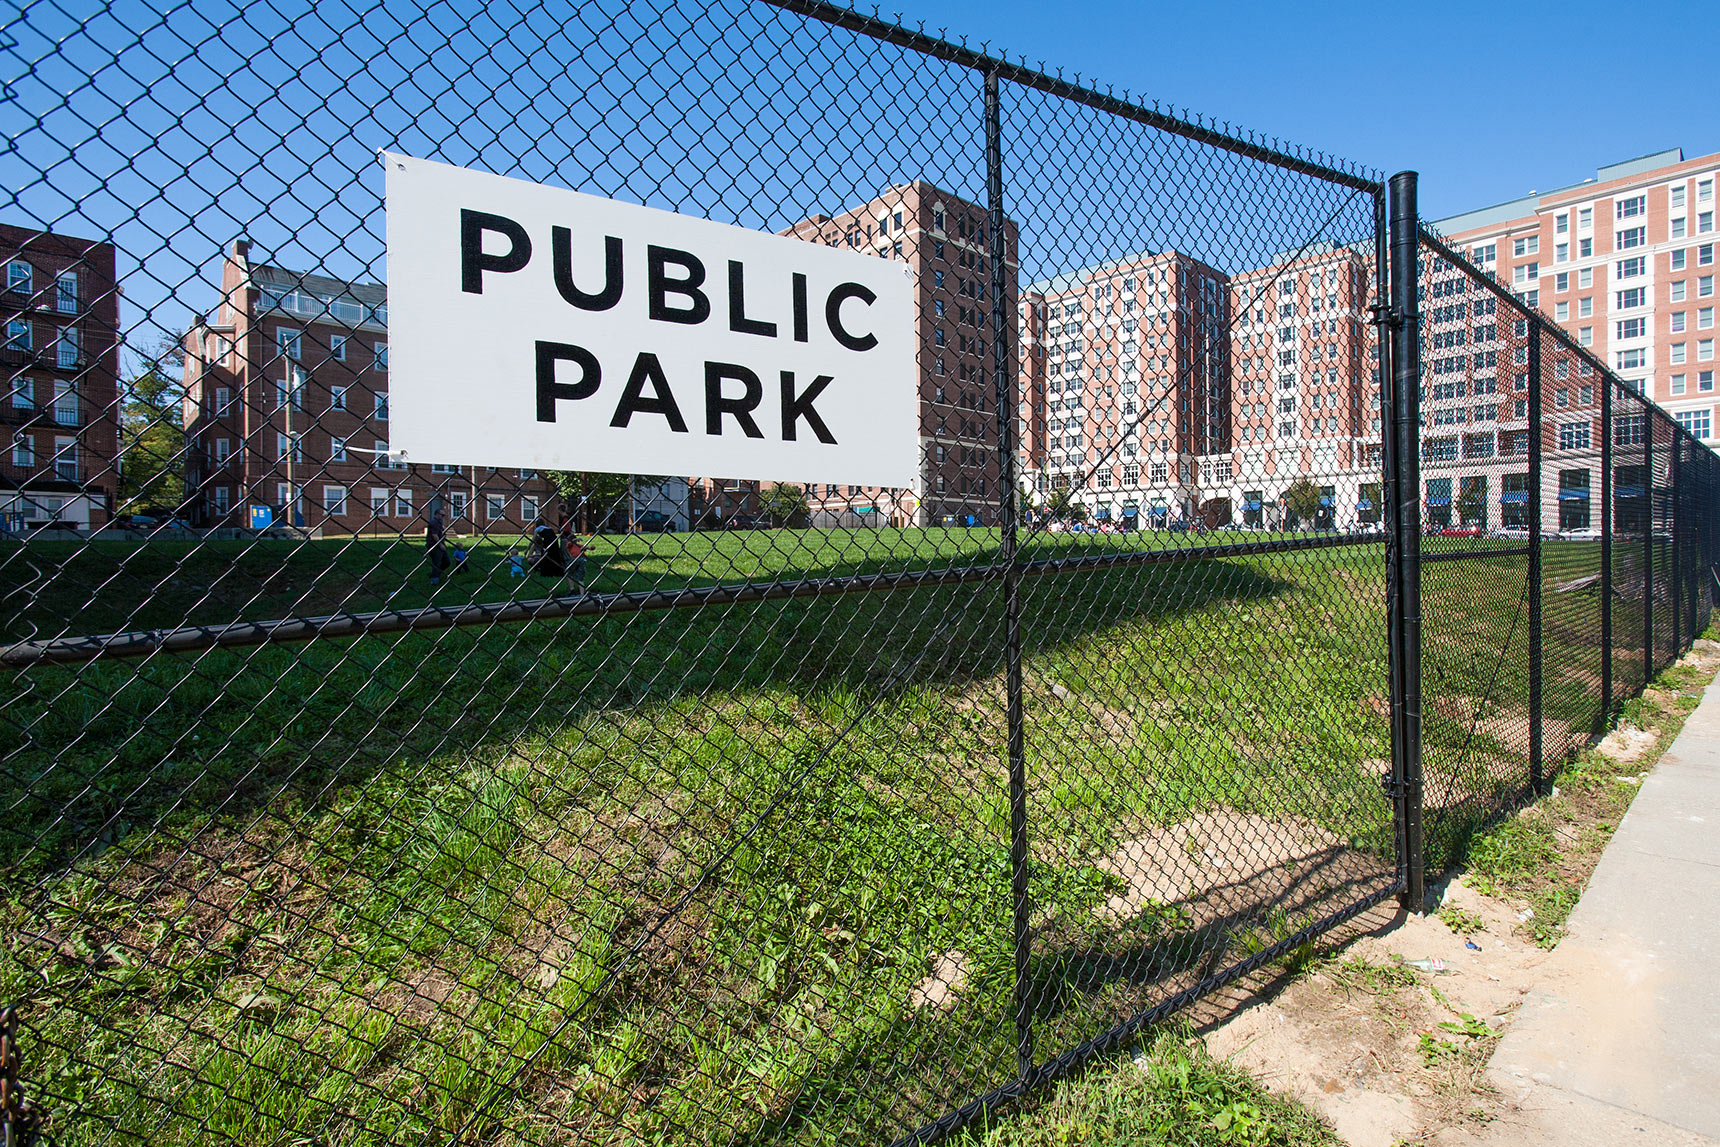 The sign for Public Park up on a private lot in Charles Village, Baltimore